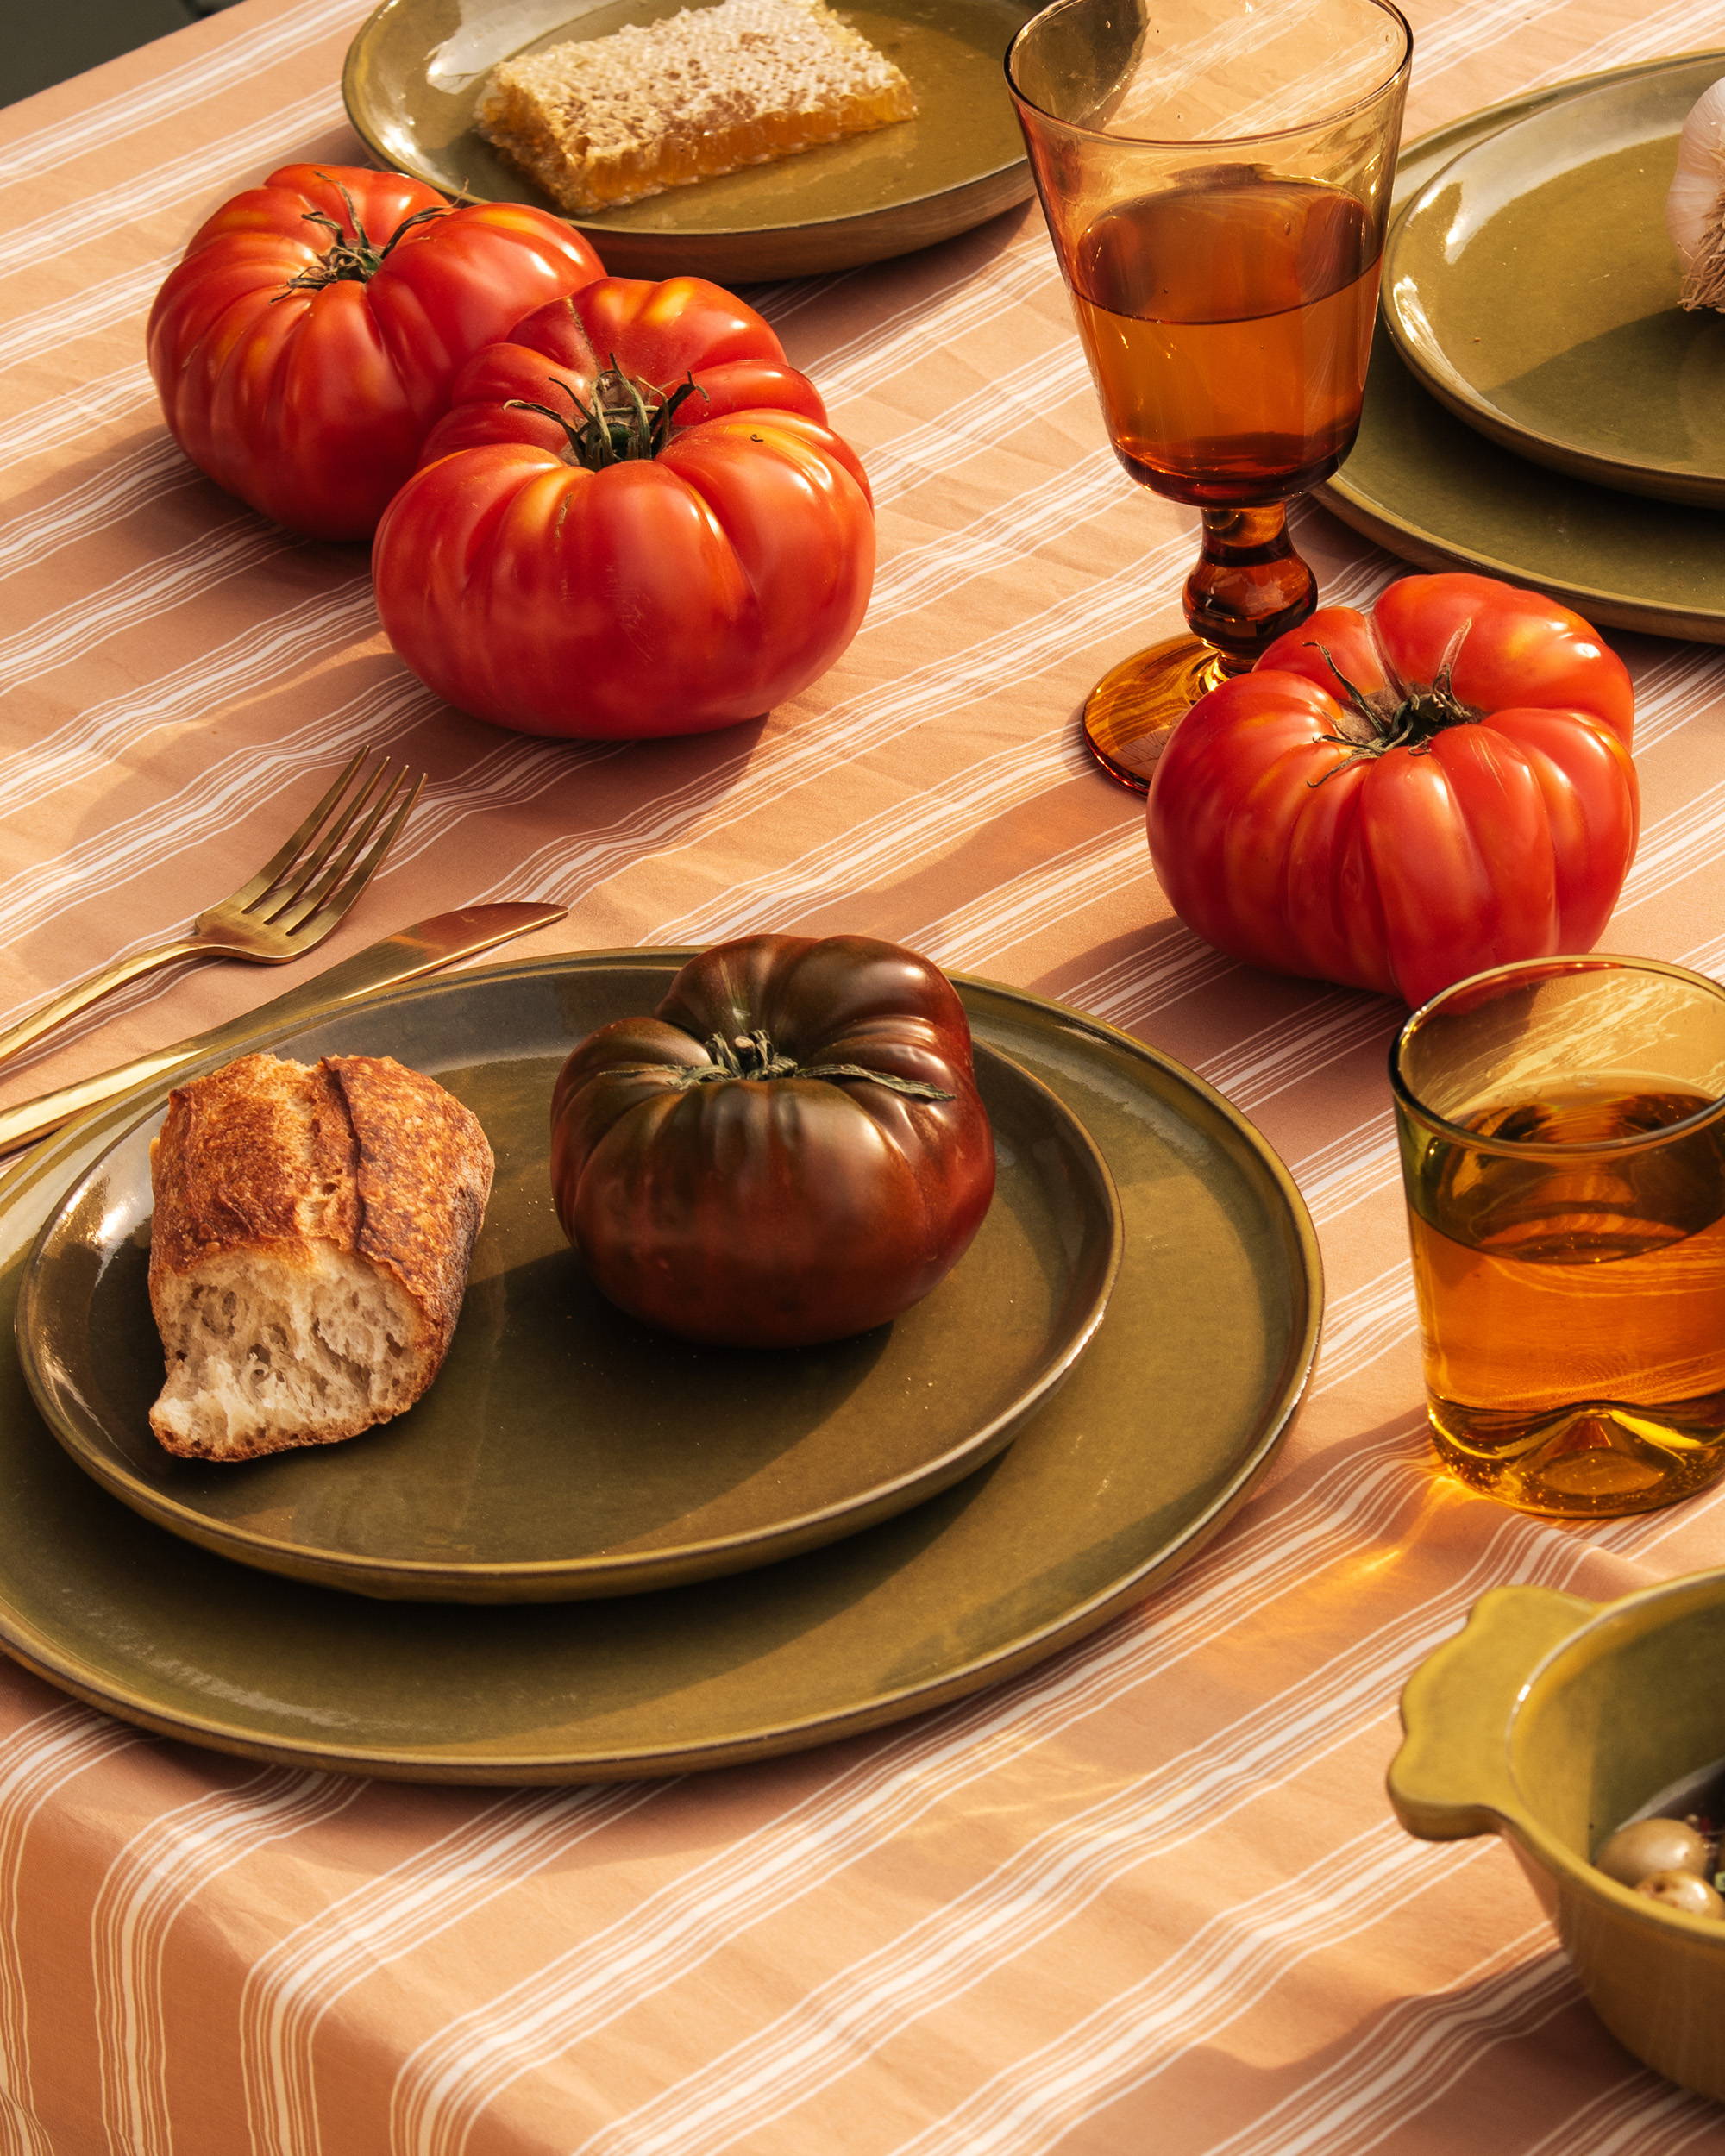 Entertaining with style, Unique Ceramic Tableware, Tomato Recipes, Italian Themed Dinner